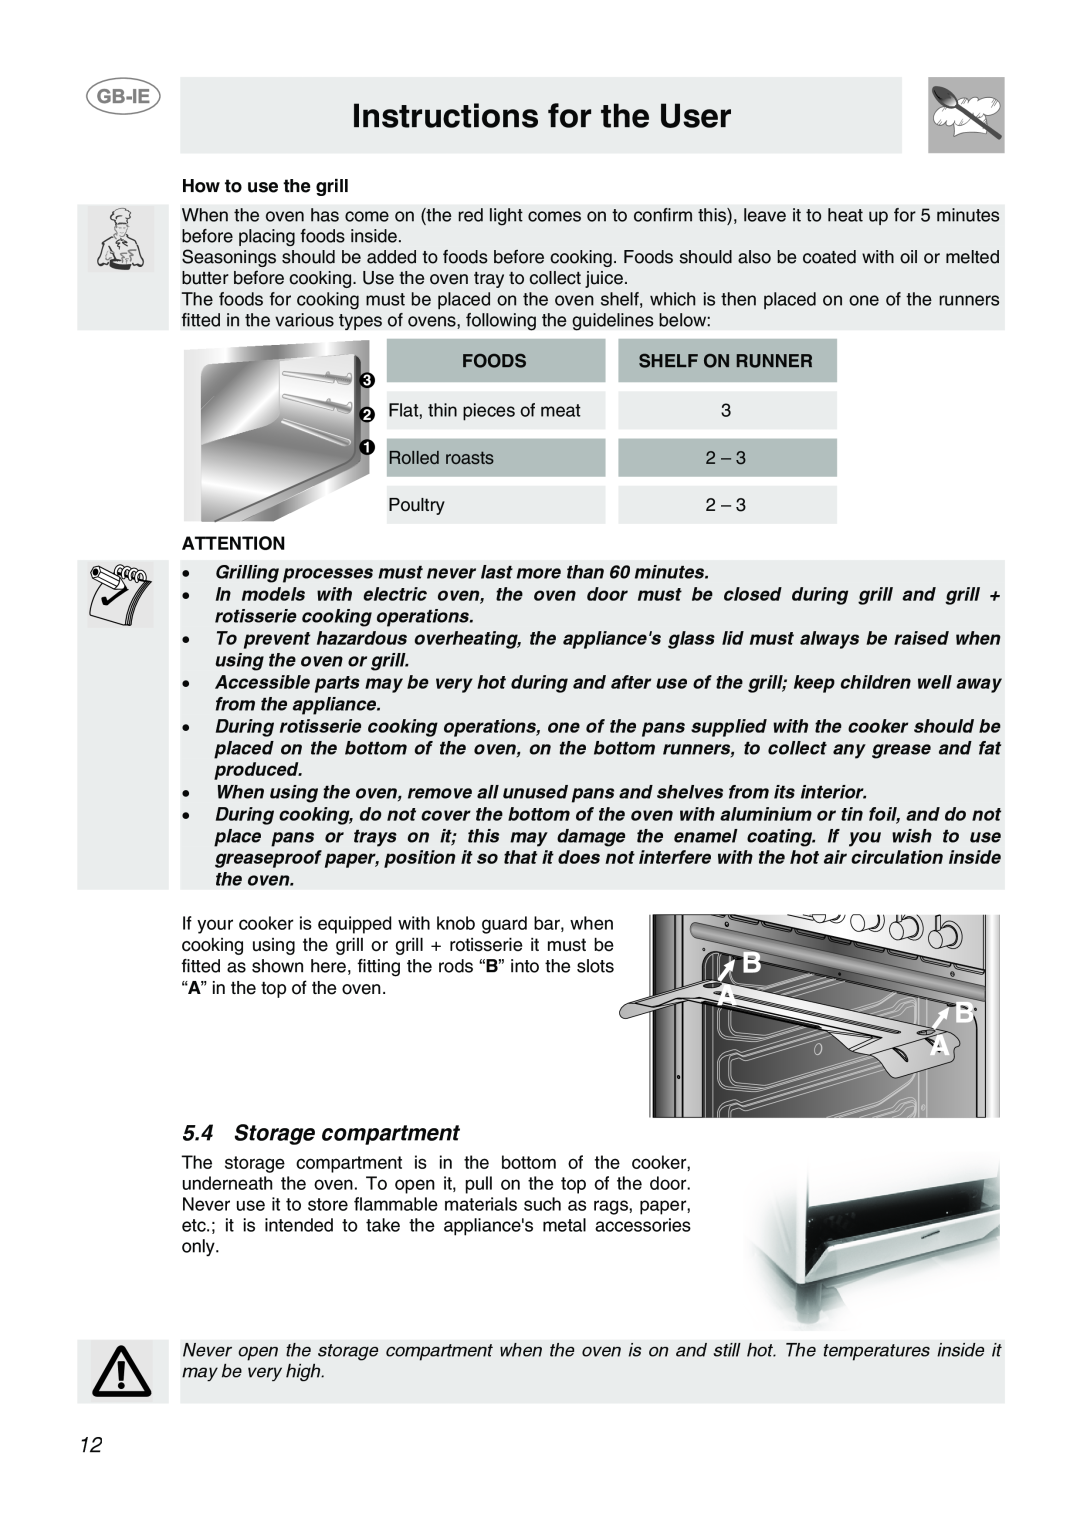 Smeg CB66CES1 manual Storage compartment, Instructions for the User, How to use the grill, Foods, Shelf On Runner 